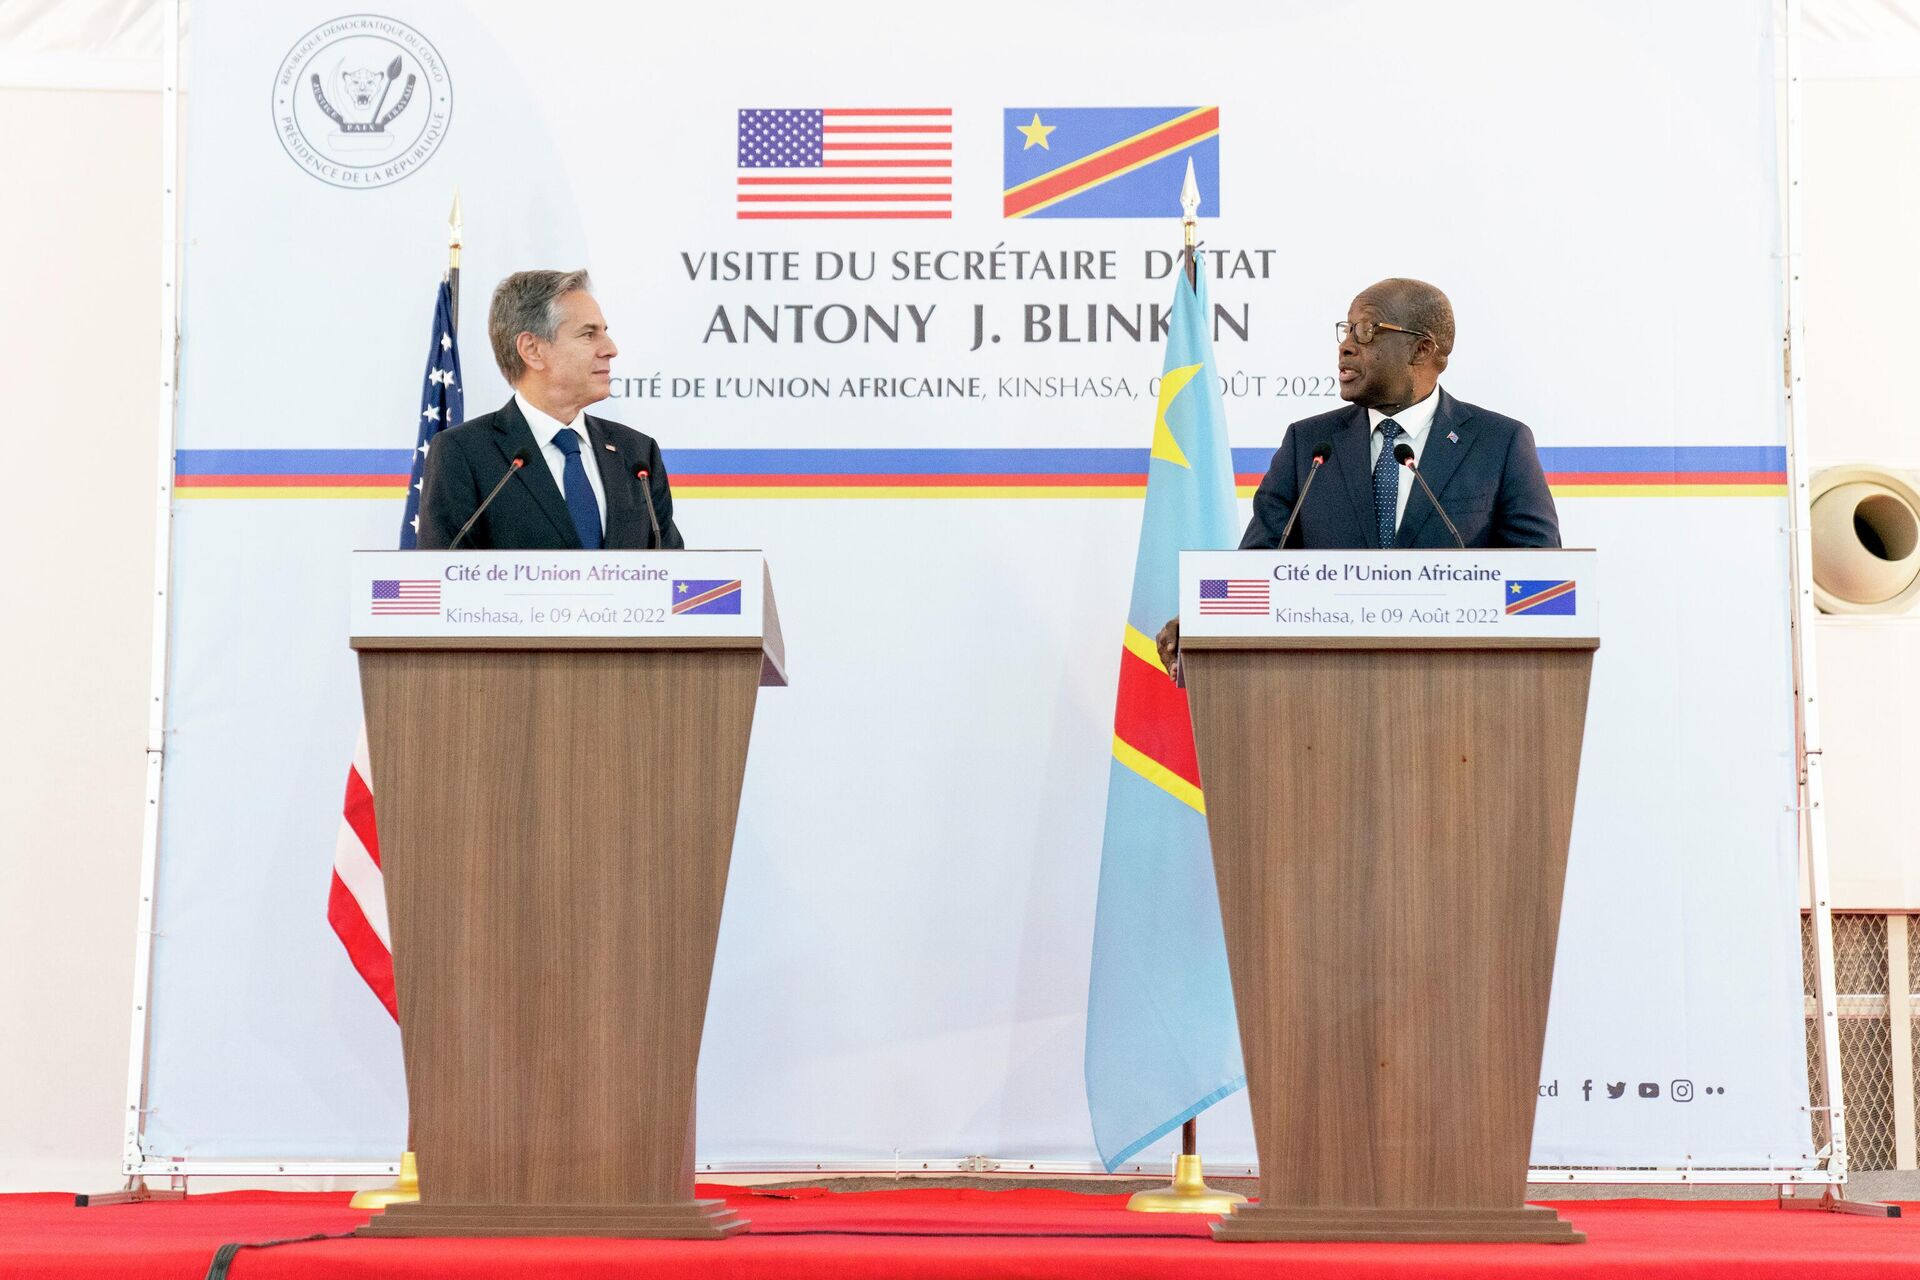 US Secretary of State Antony Blinken and Congo Foreign Minister Christophe Lutundula hold a news conference at Cite de l'OUA in Kinshasa, Congo, Tuesday, Aug. 9, 2022. Blinken is on a ten day trip to Cambodia, Philippines, South Africa, Congo, and Rwanda. - Sputnik International, 1920, 10.08.2022